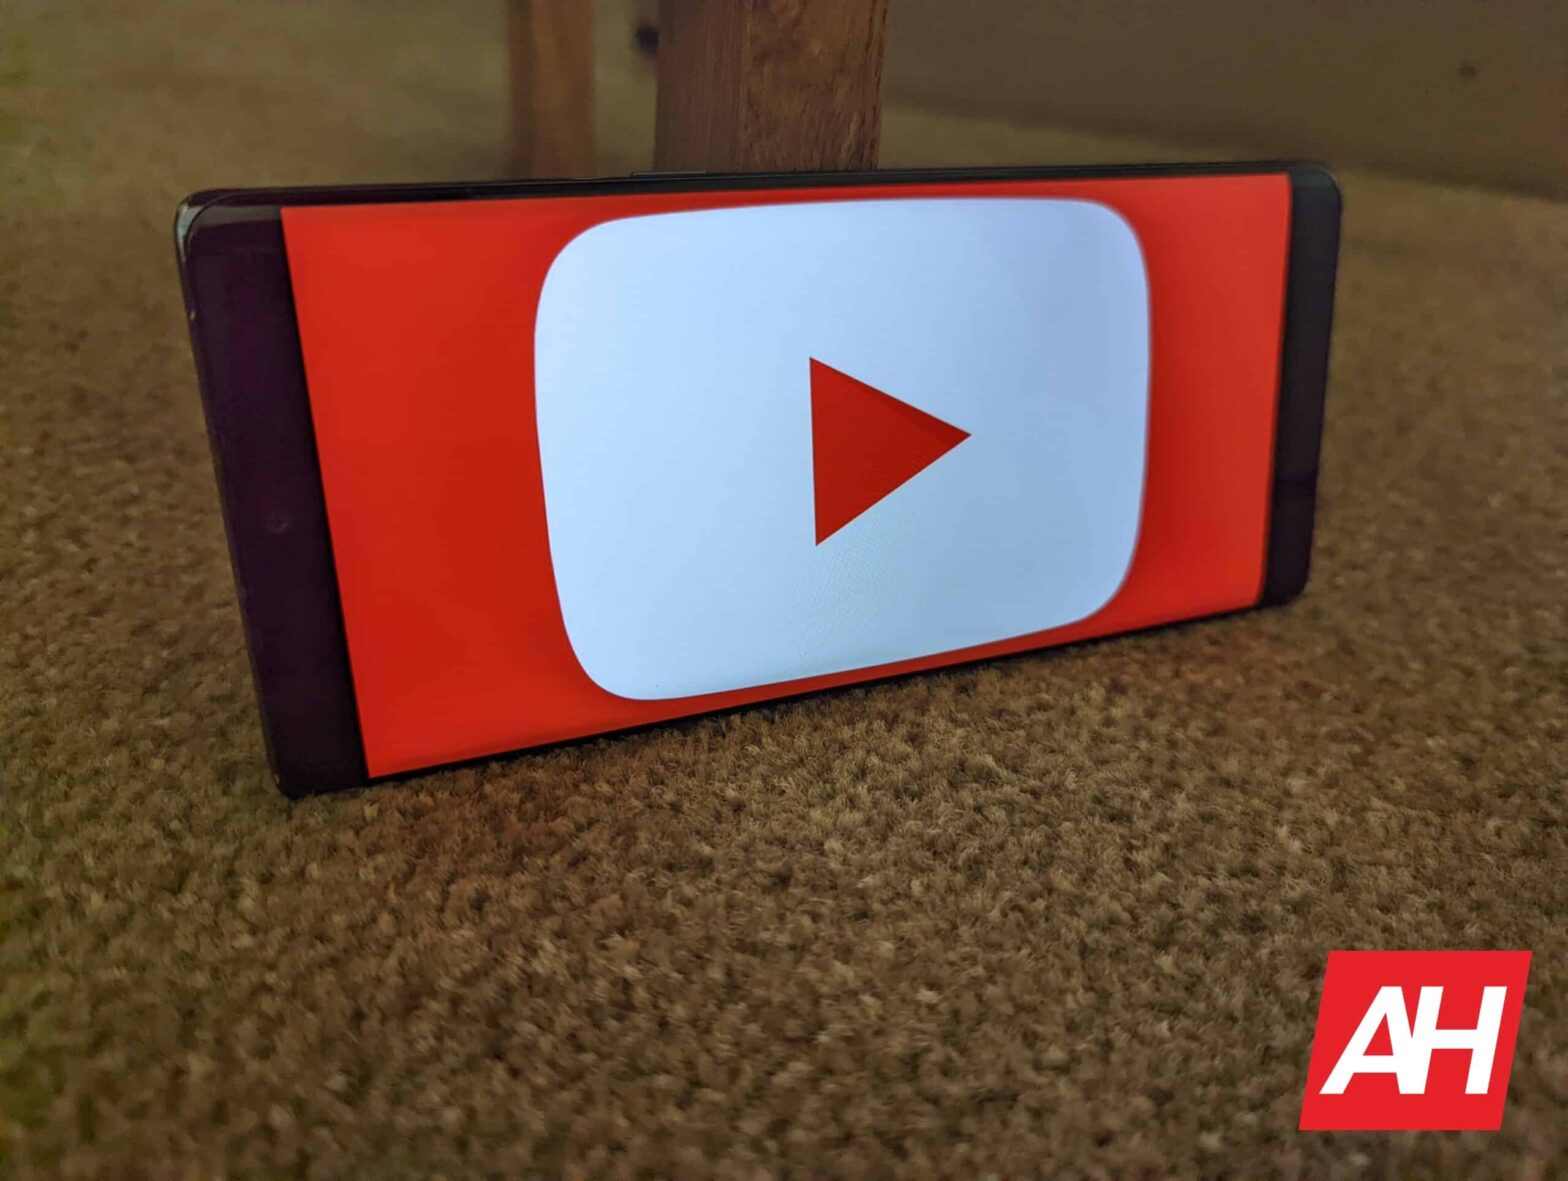 YouTube for desktop is sporting rounded corners